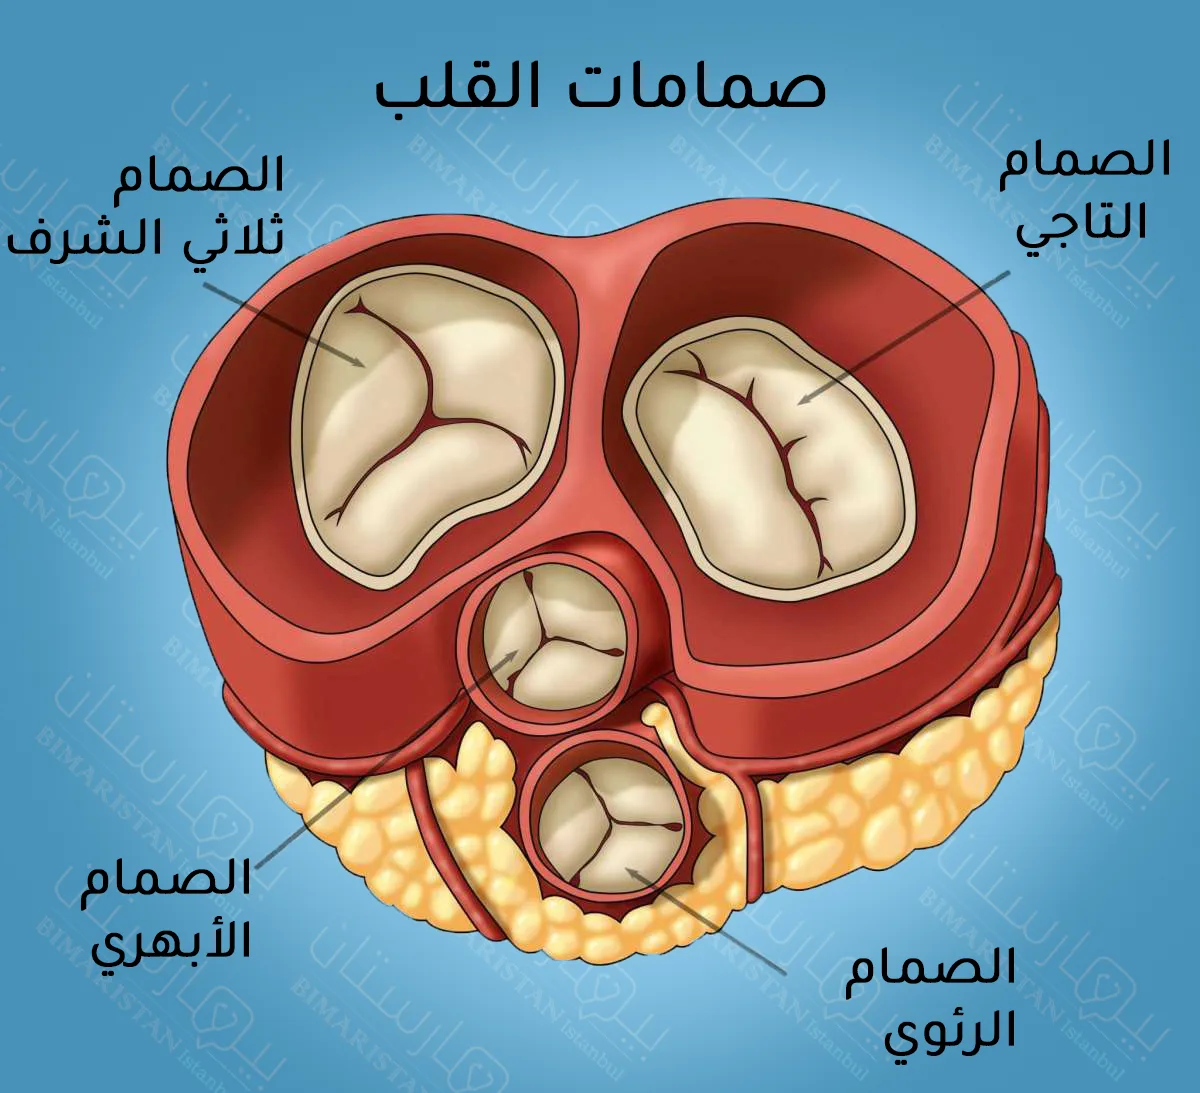 The heart has four valves: the mitral valve, the tricuspid valve, the pulmonary valve, and the aortic valve